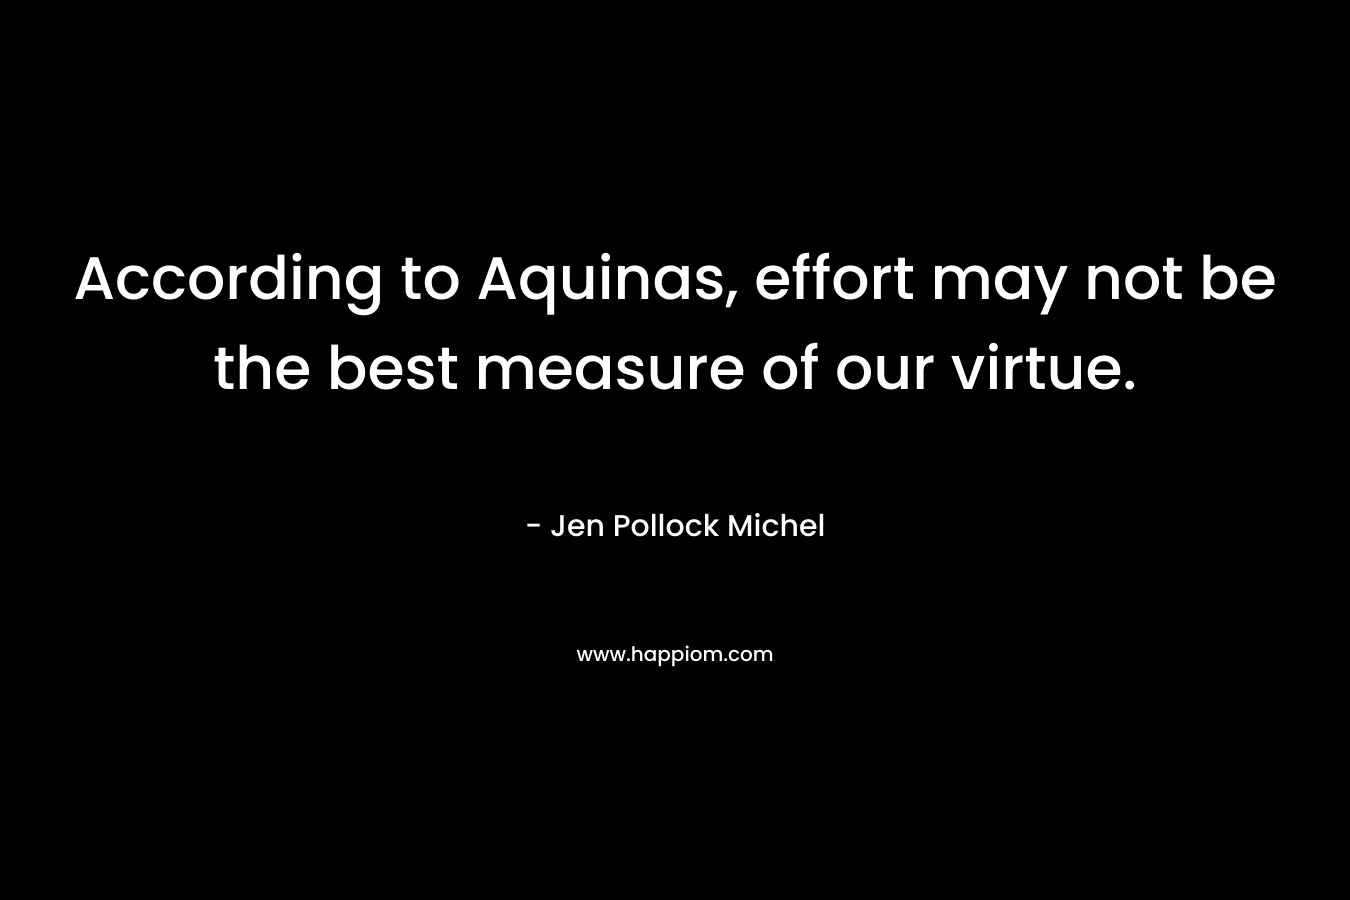 According to Aquinas, effort may not be the best measure of our virtue.